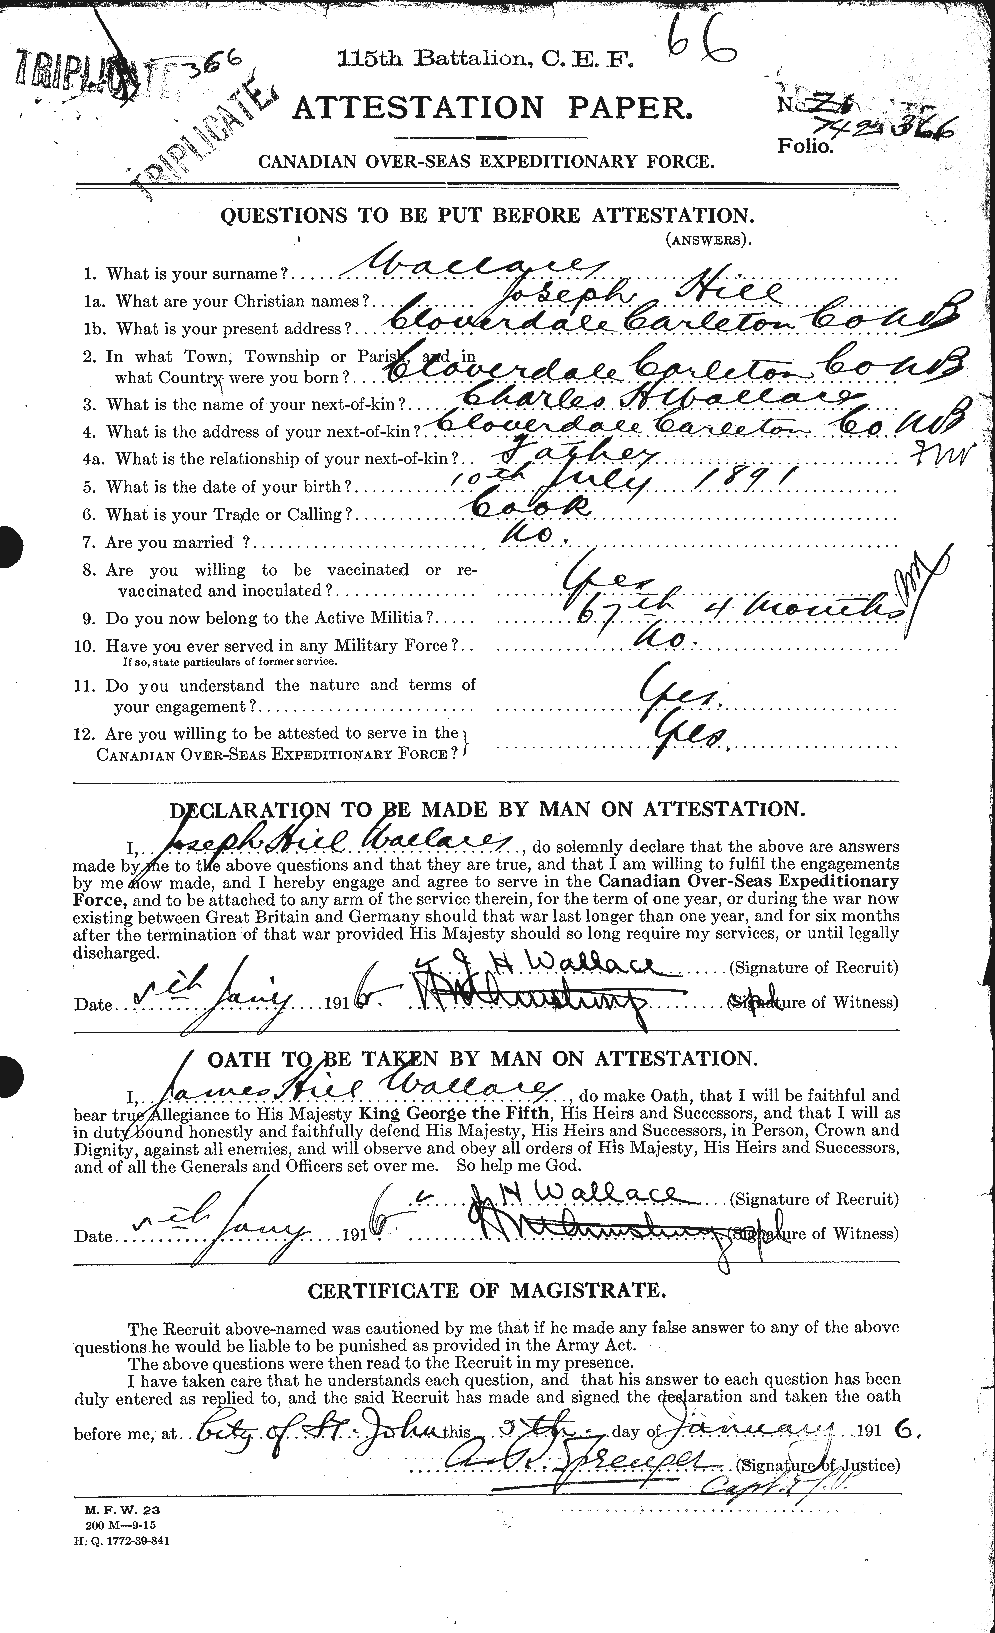 Personnel Records of the First World War - CEF 654659a